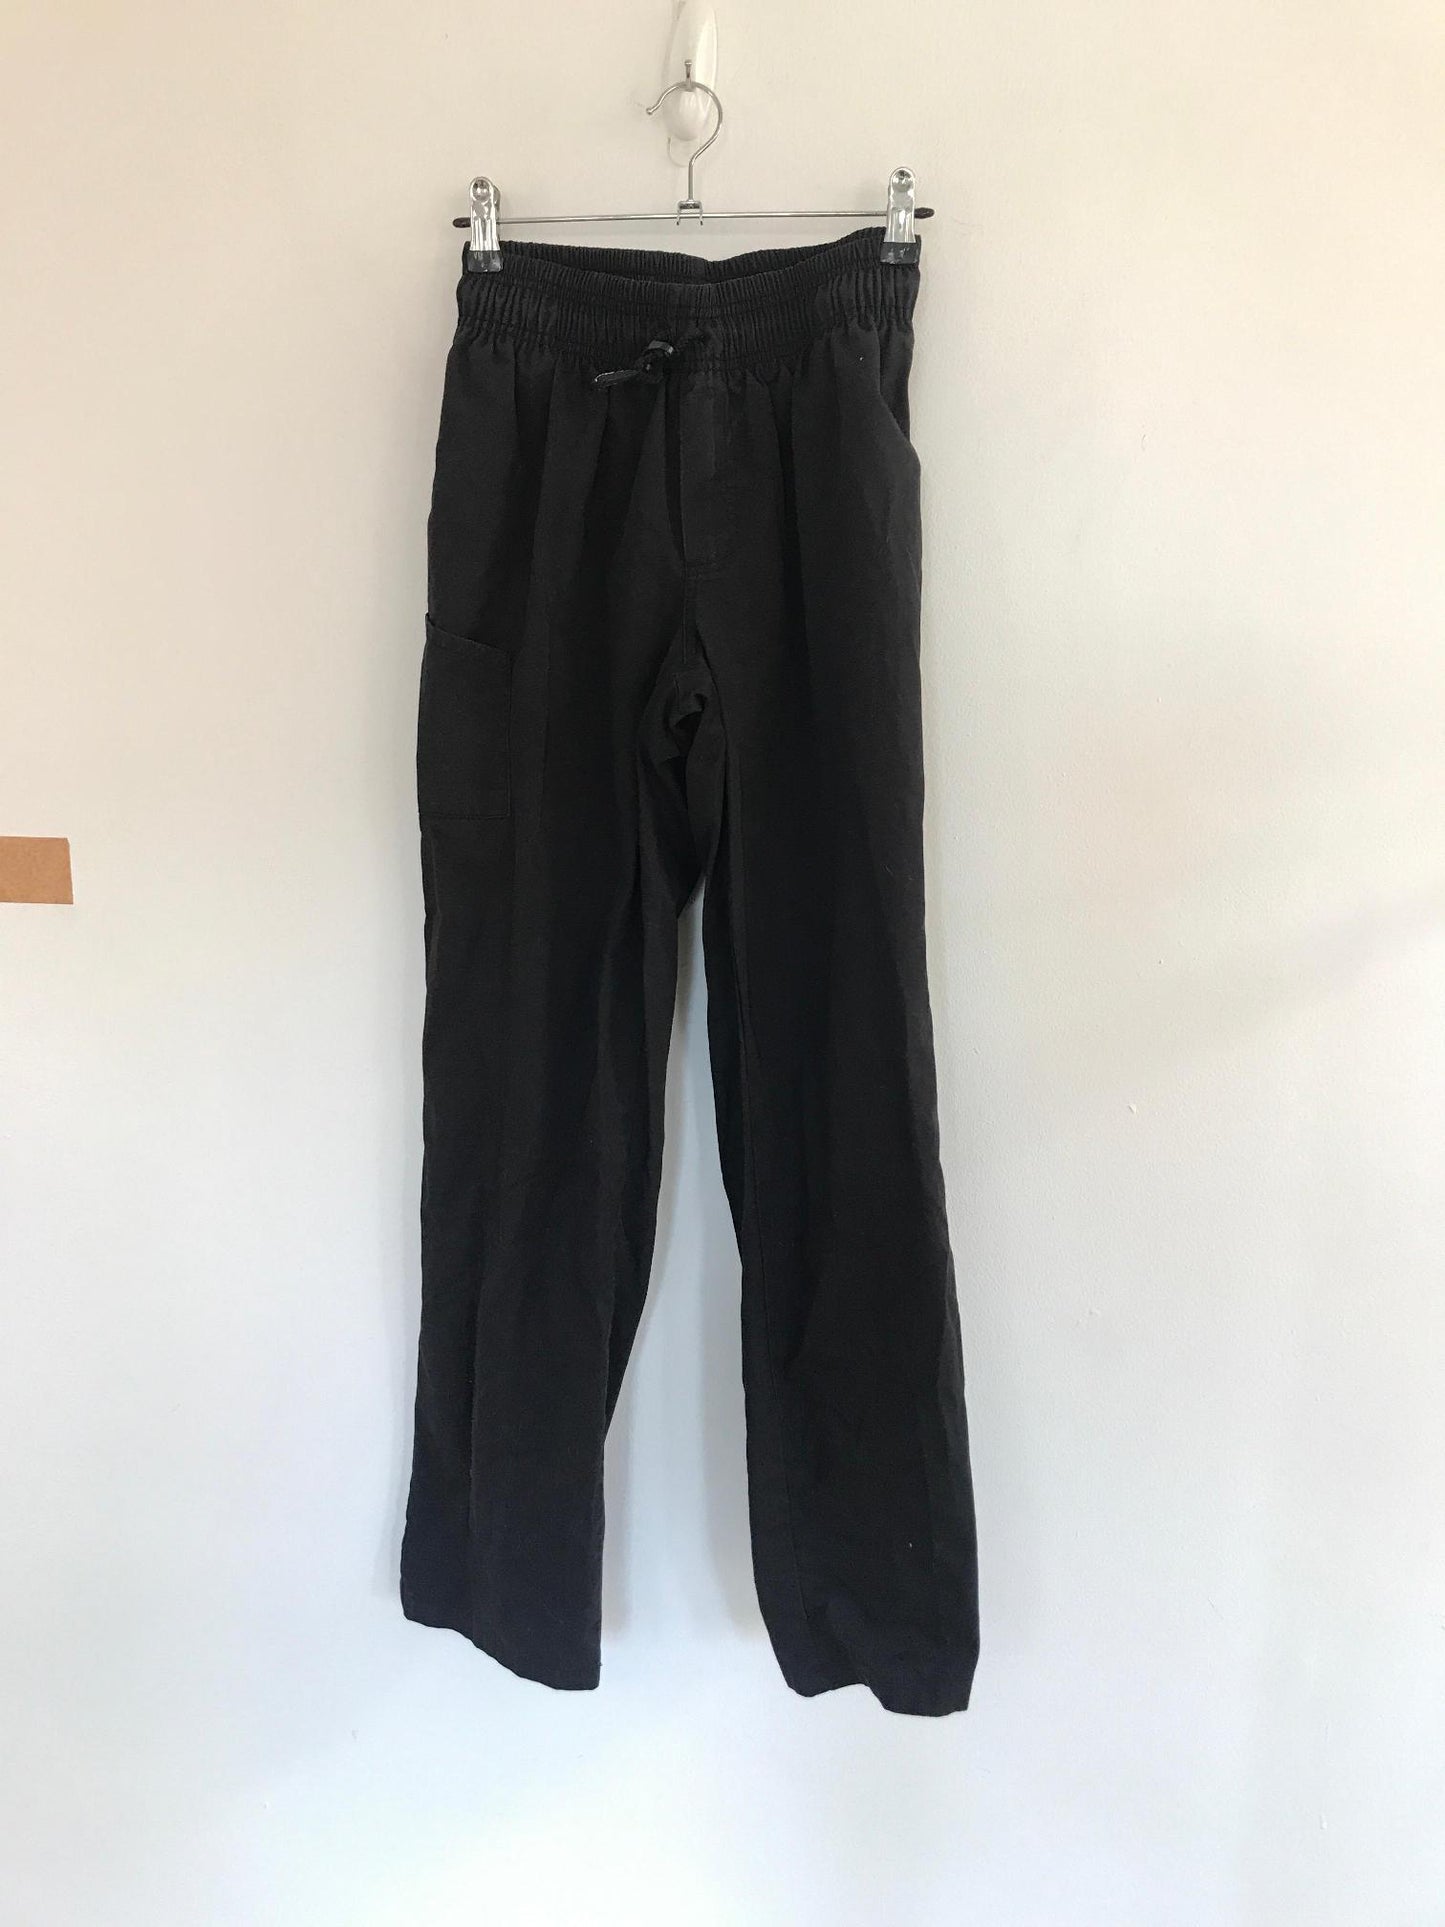 Black Utility Work Trousers- Mid Rise, Le Chef, Size 6 (-)